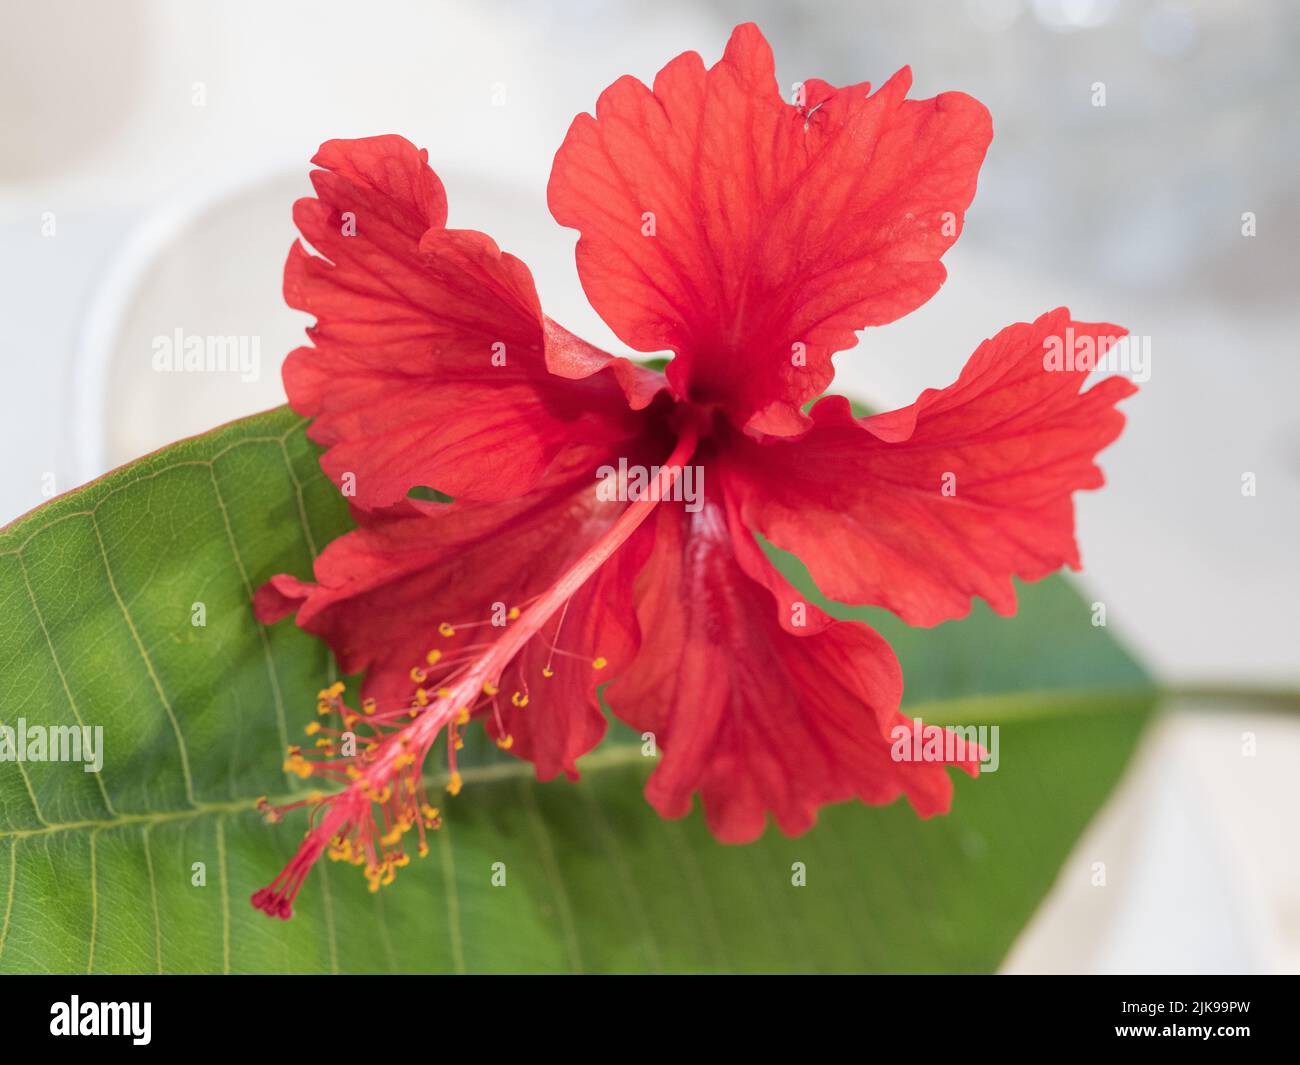 Flowers, vibrant bright Scarlet red coloured Hibiscus flower on a green leaf, from an Australian sub tropical coastal garden Stock Photo